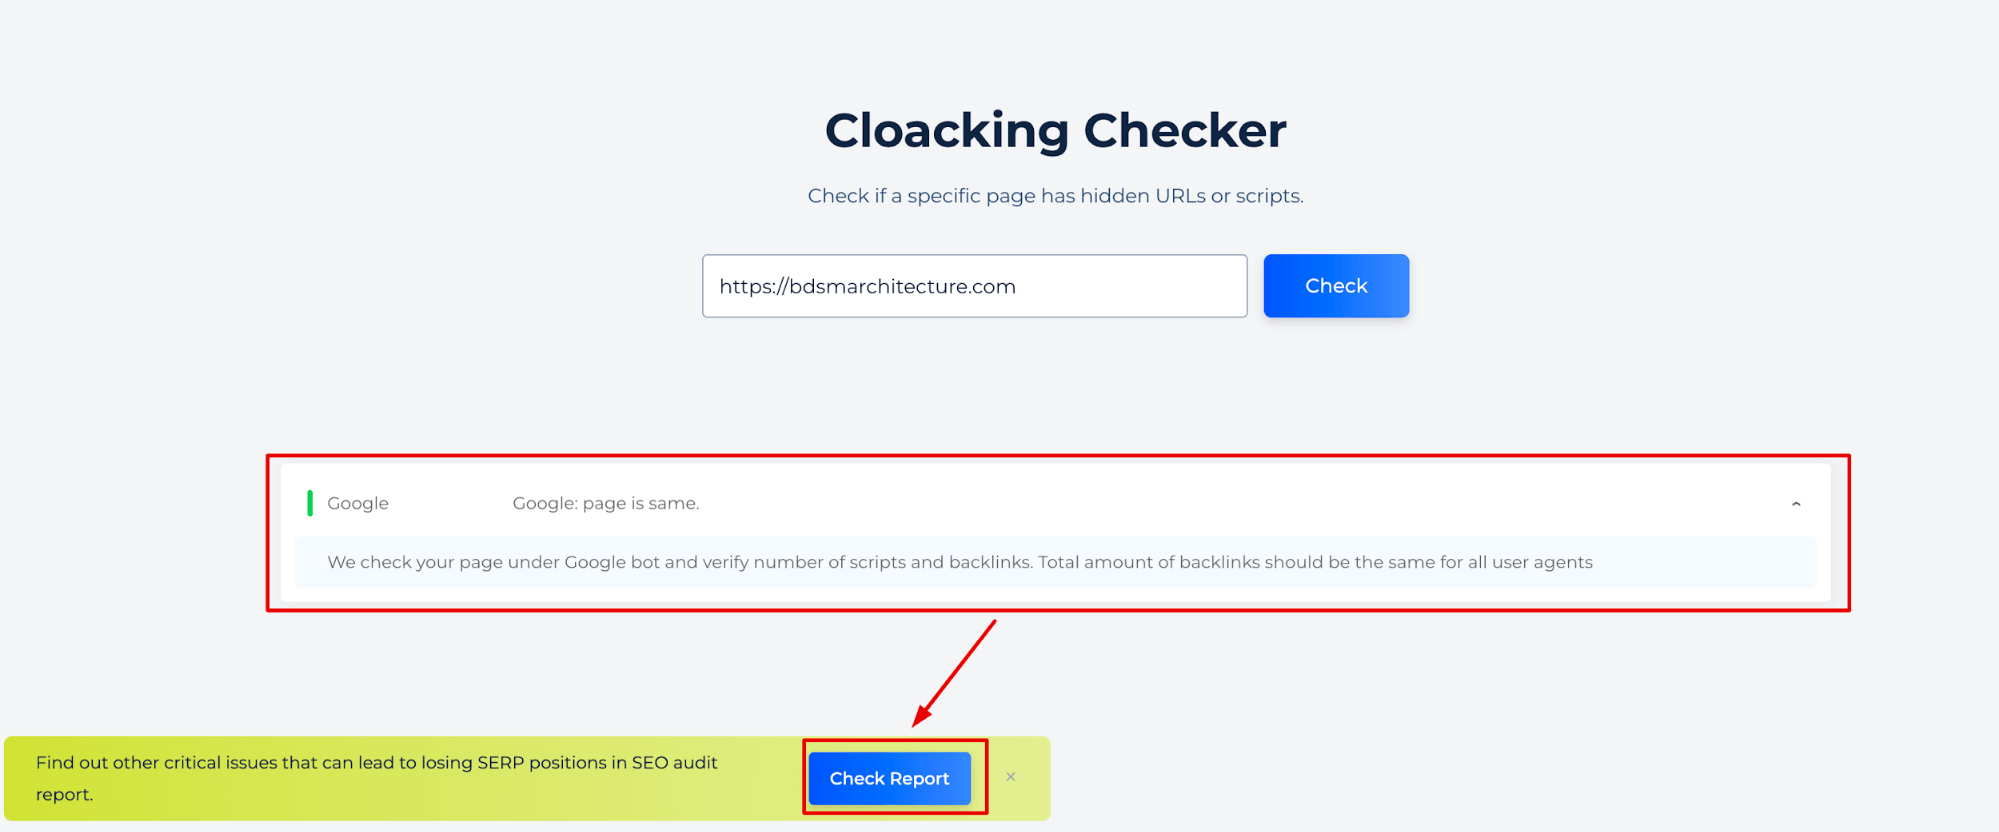 Website Cloaking Checker Results